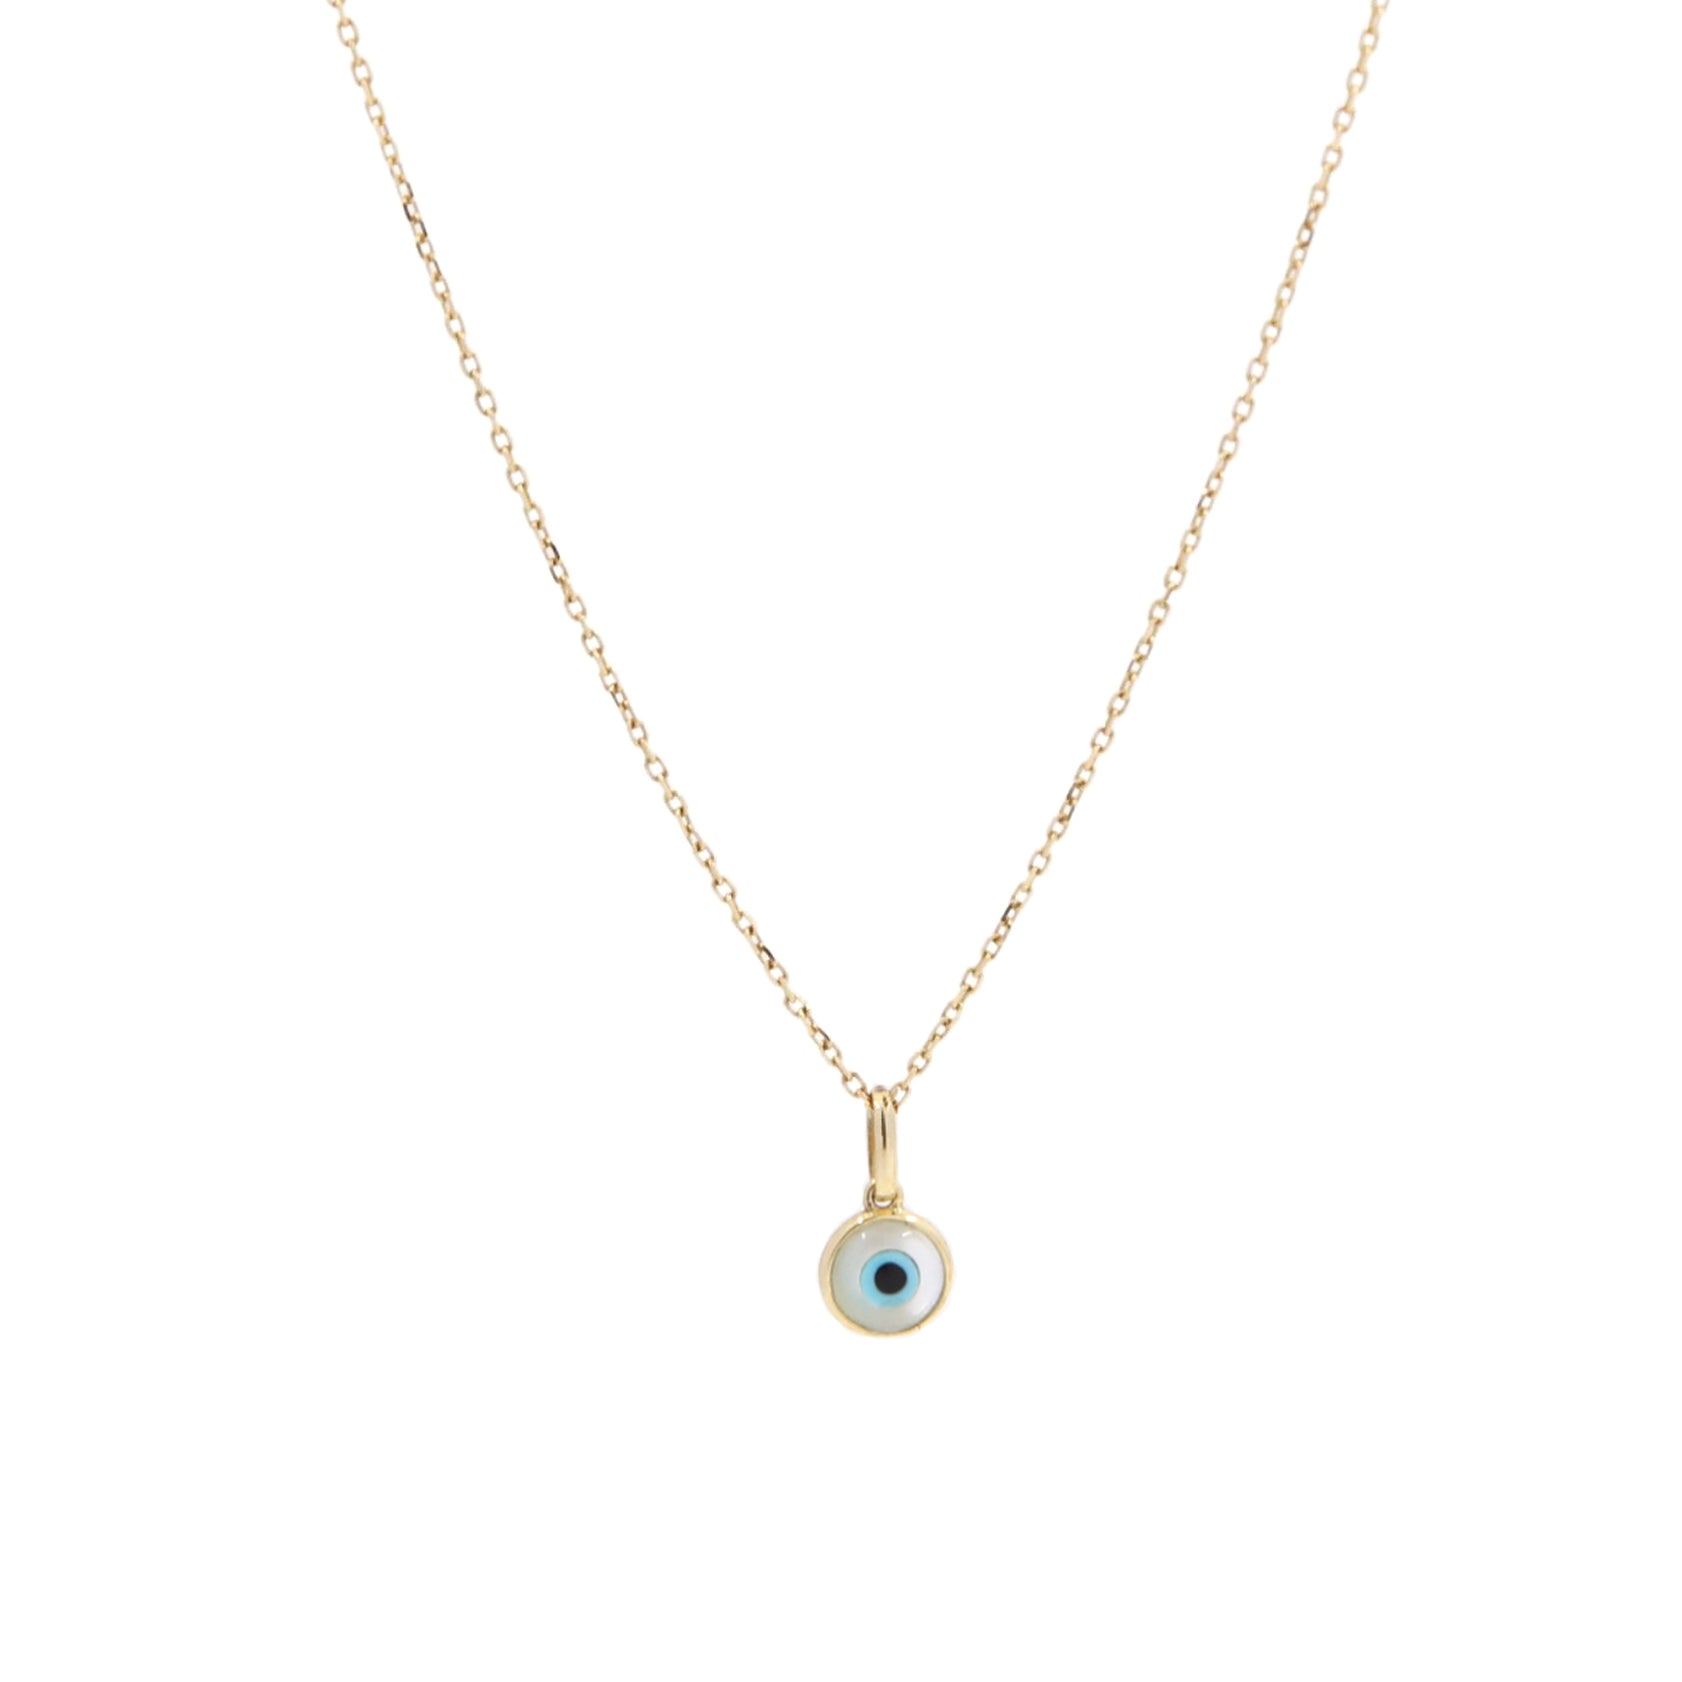 Shop Gold Evil Eye Mother of Pearl Necklace